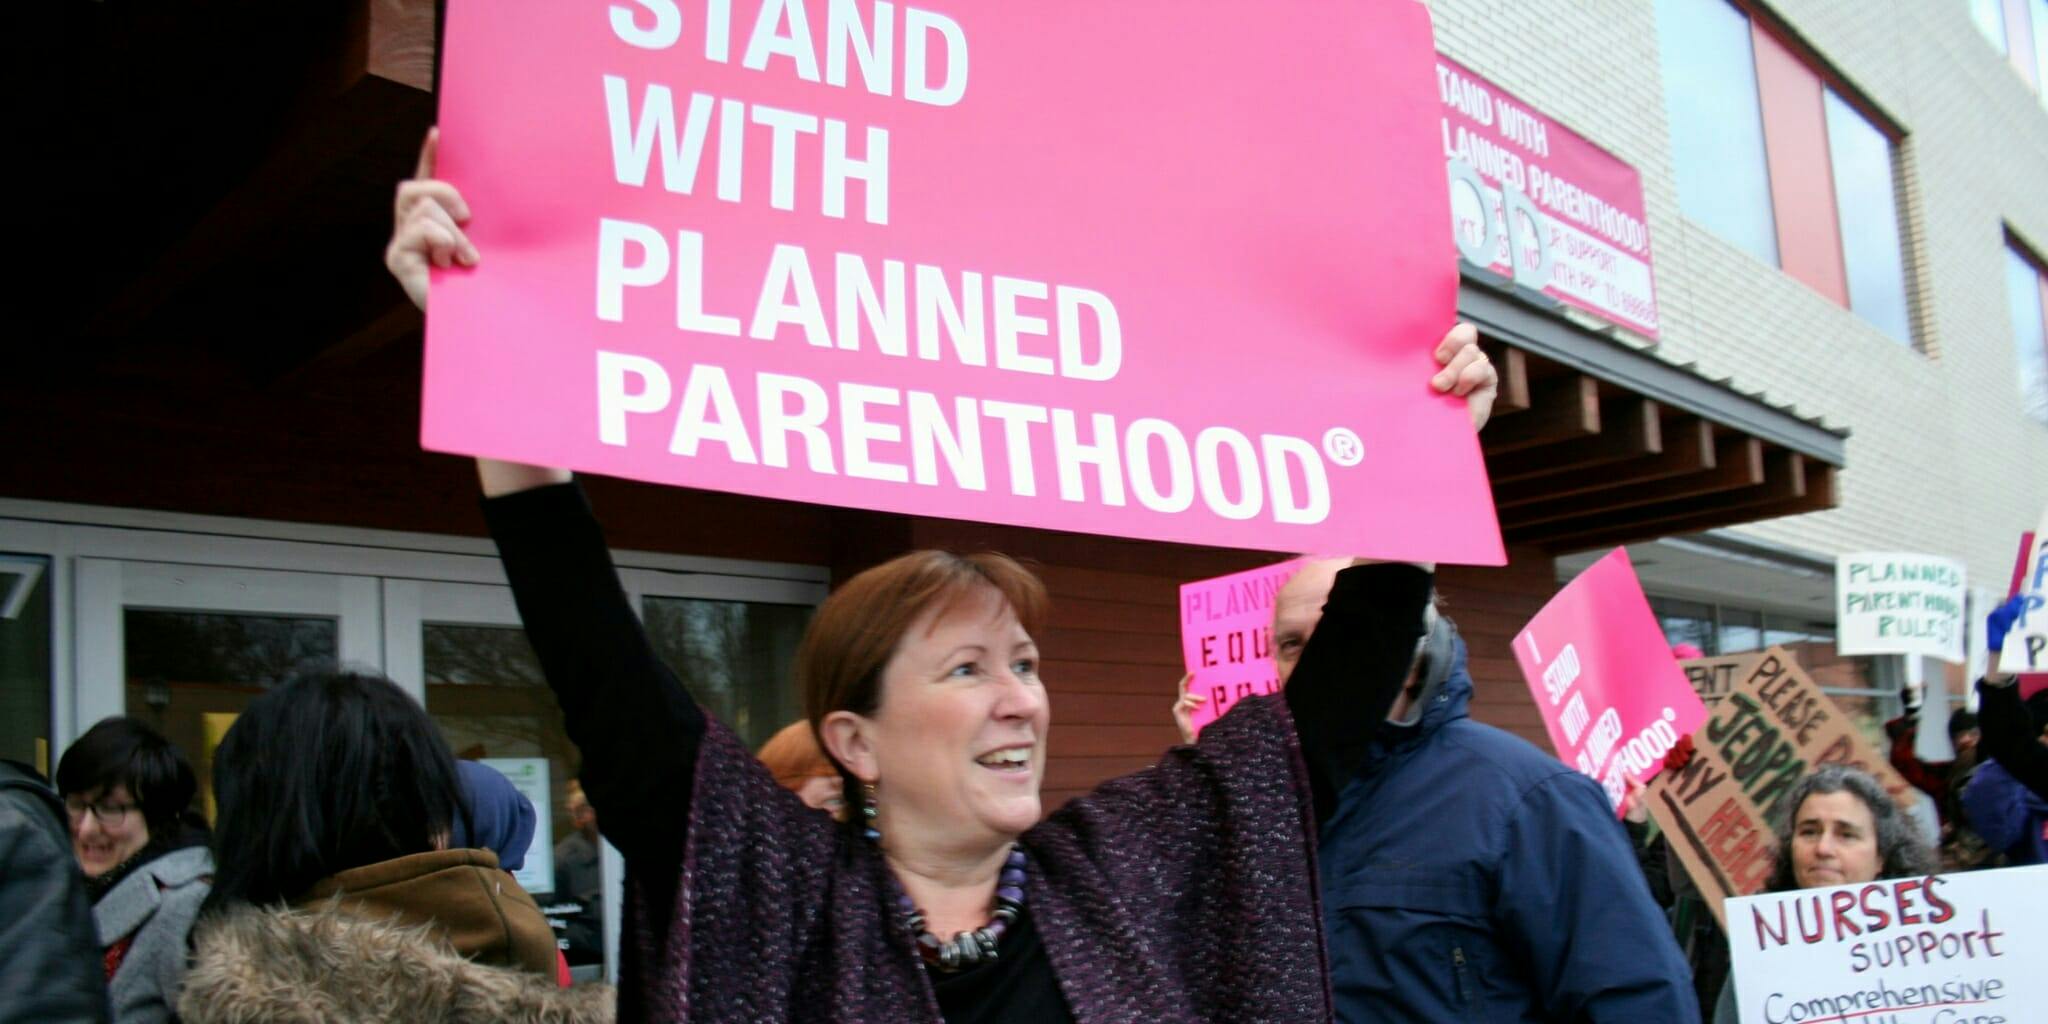 Planned Parenthood supporters protesting with signs.